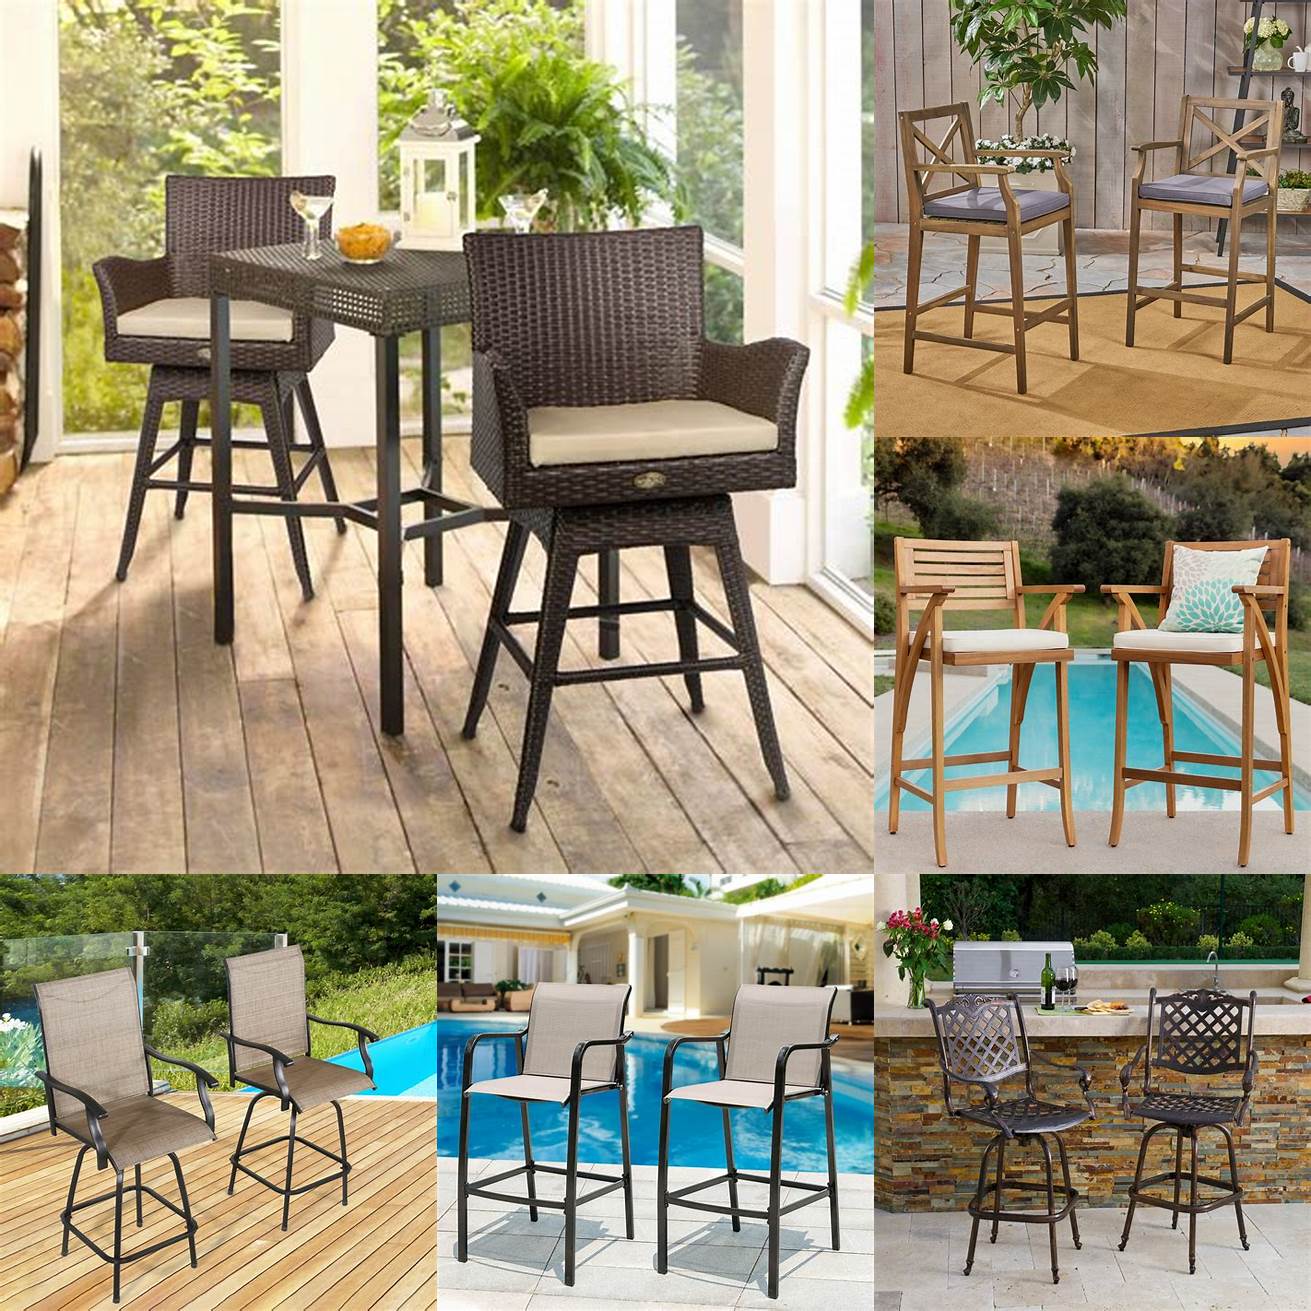 Outdoor Bars and Stools